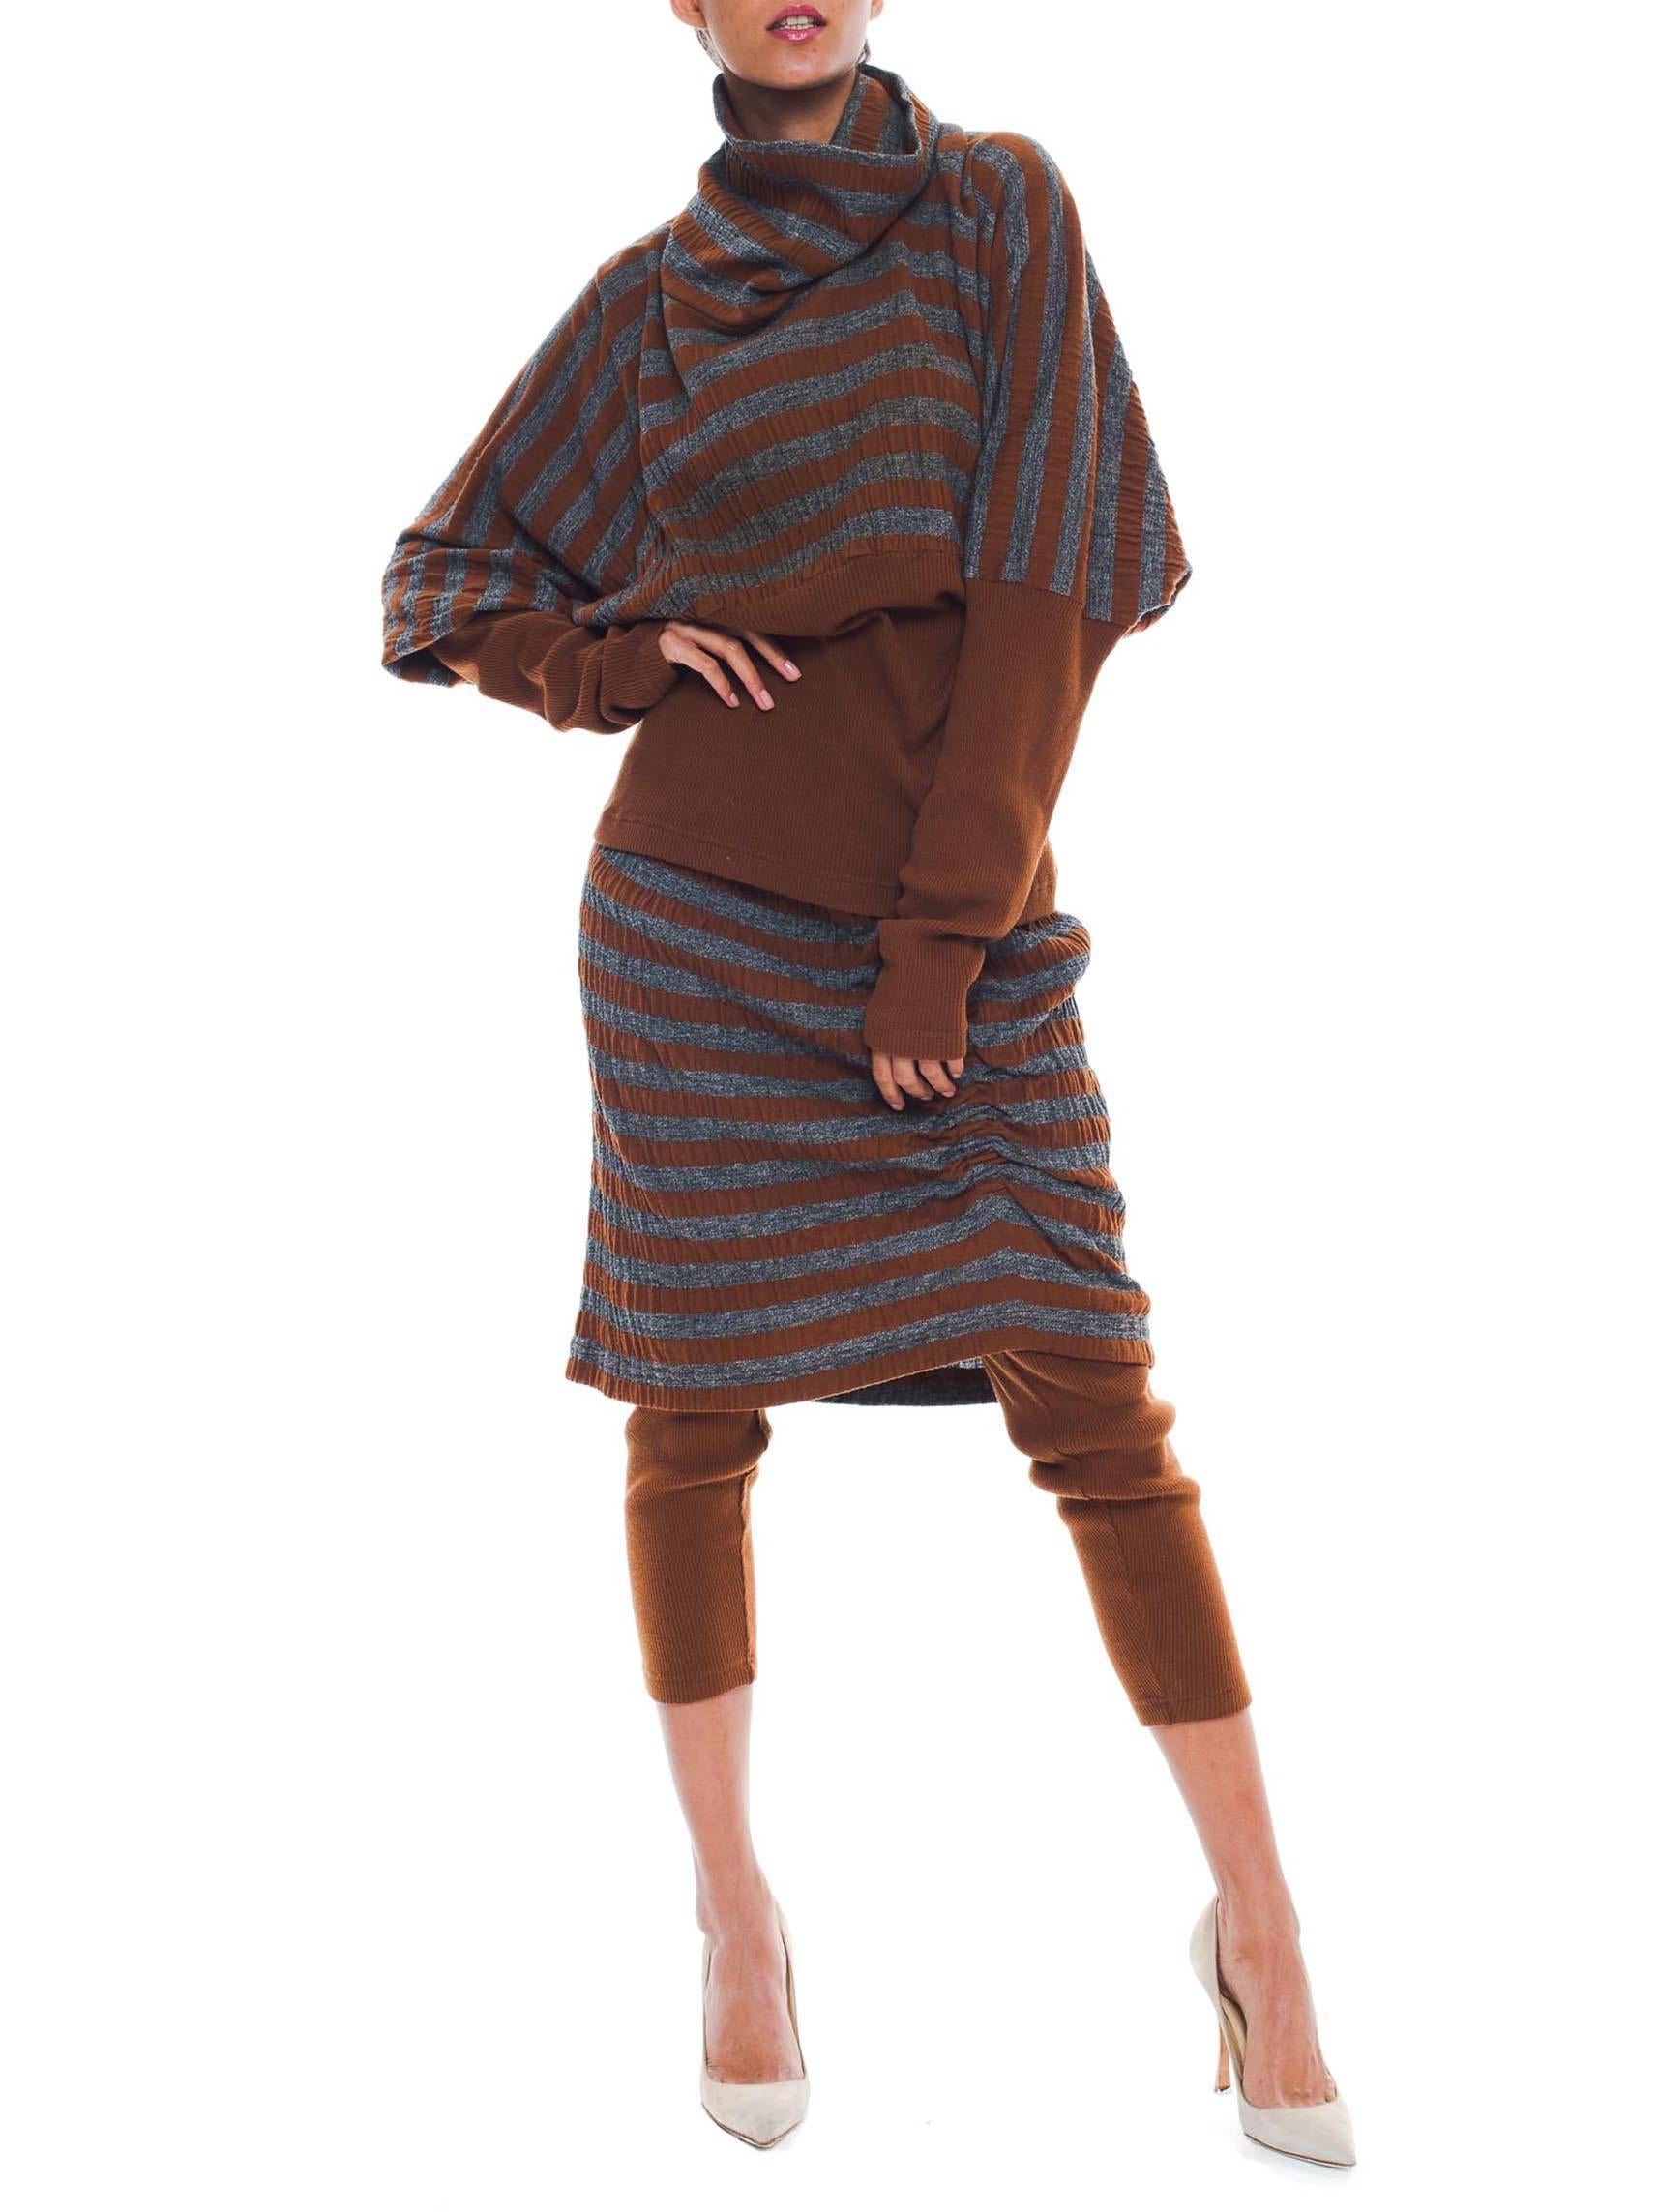 This is a matching knitwear set from famed Japanese designer Issey Miyake. In shades of burnt orange and grey, it is perfect for fall. Everyone knows that autumn is the best season for fashionable layers, and this set is made for it. The top is cut